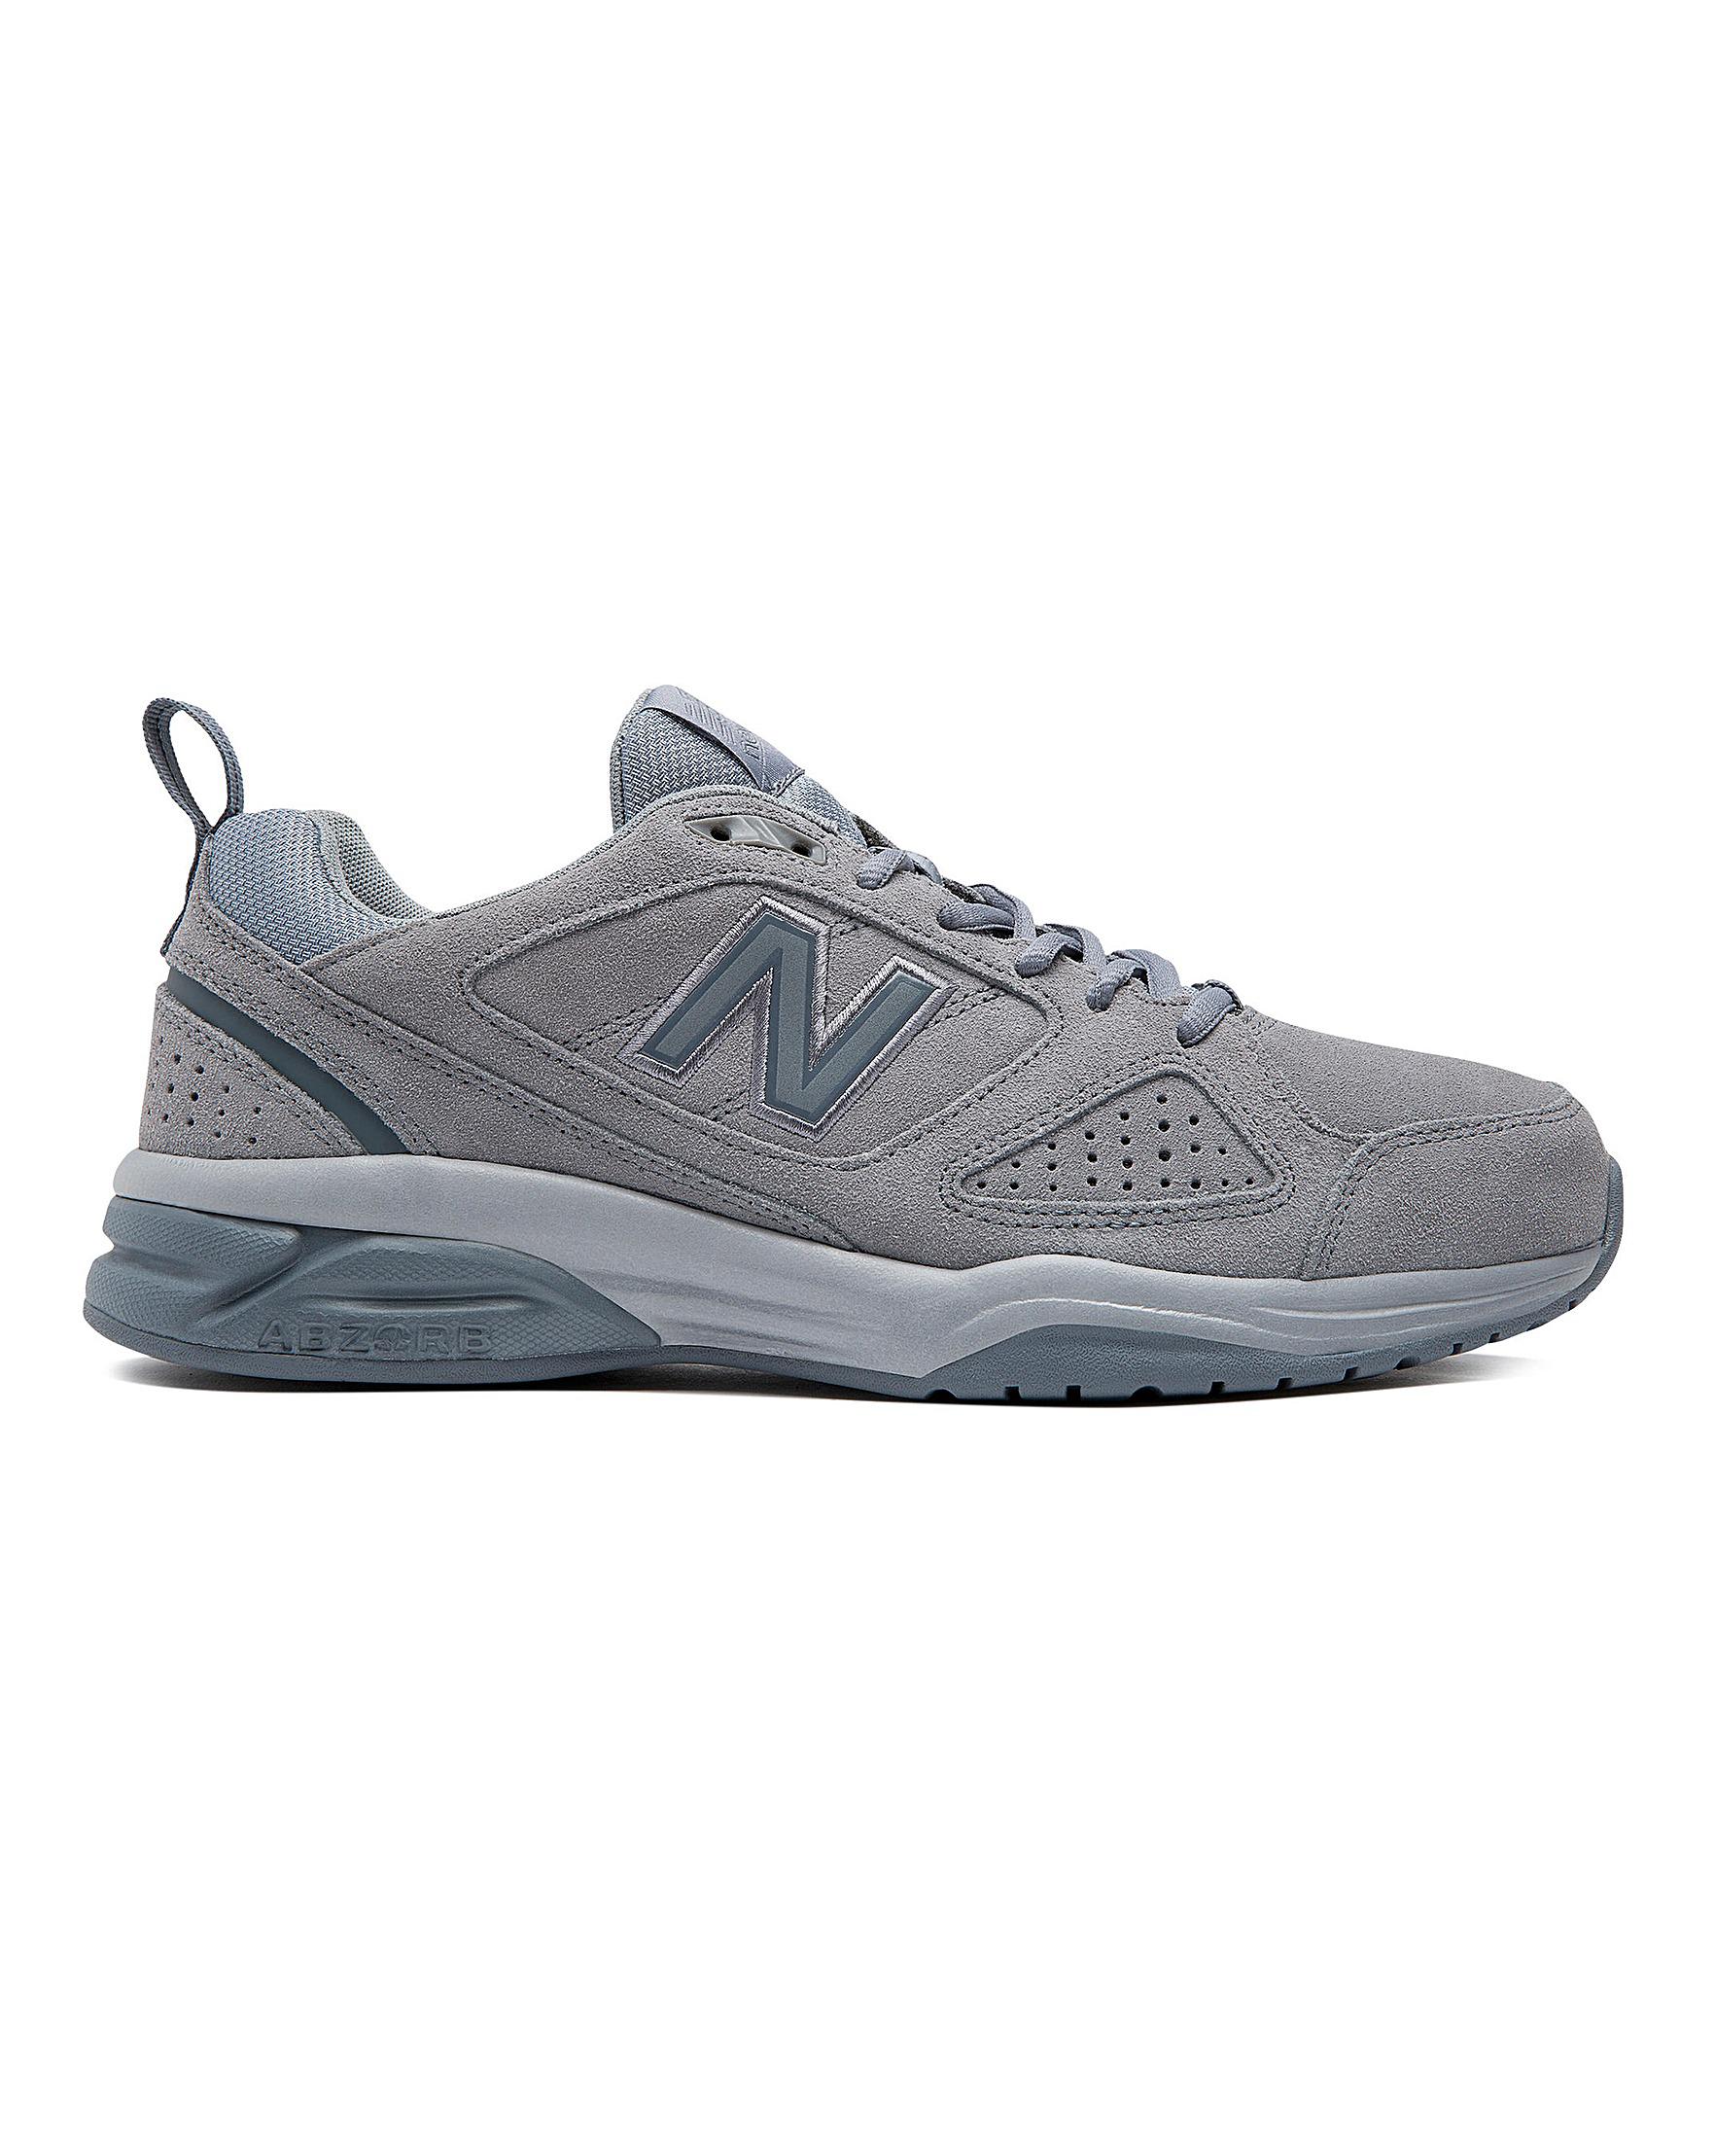 New Balance 624 Trainers Wide Fit in Gray for Men - Lyst